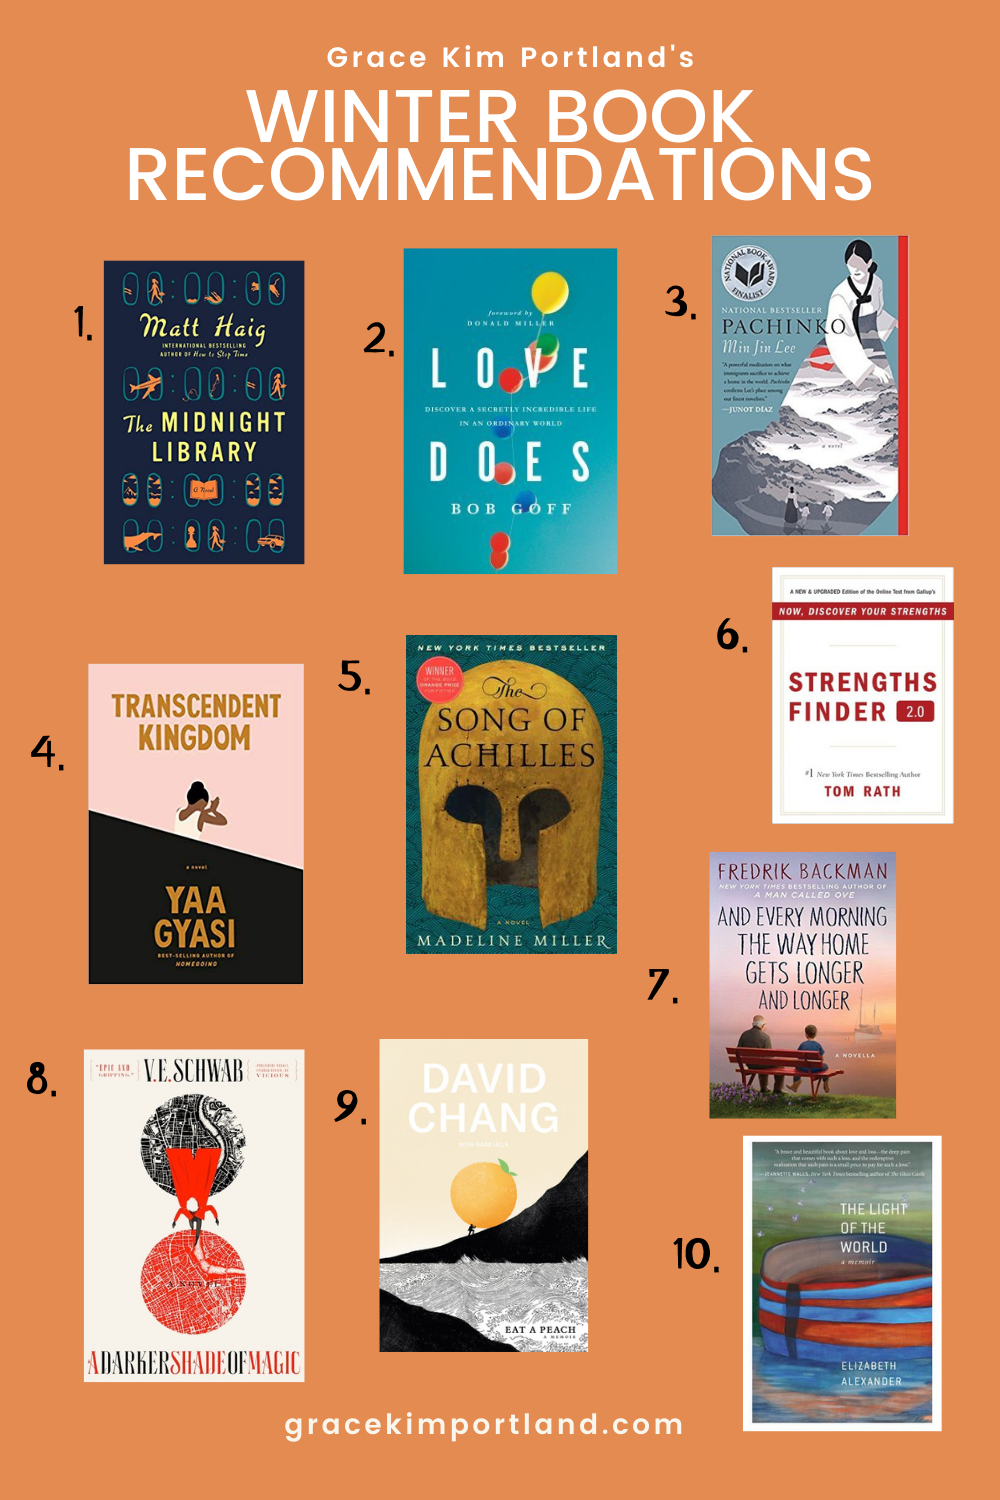 2021 Book recommendations by Grace Kim Portland